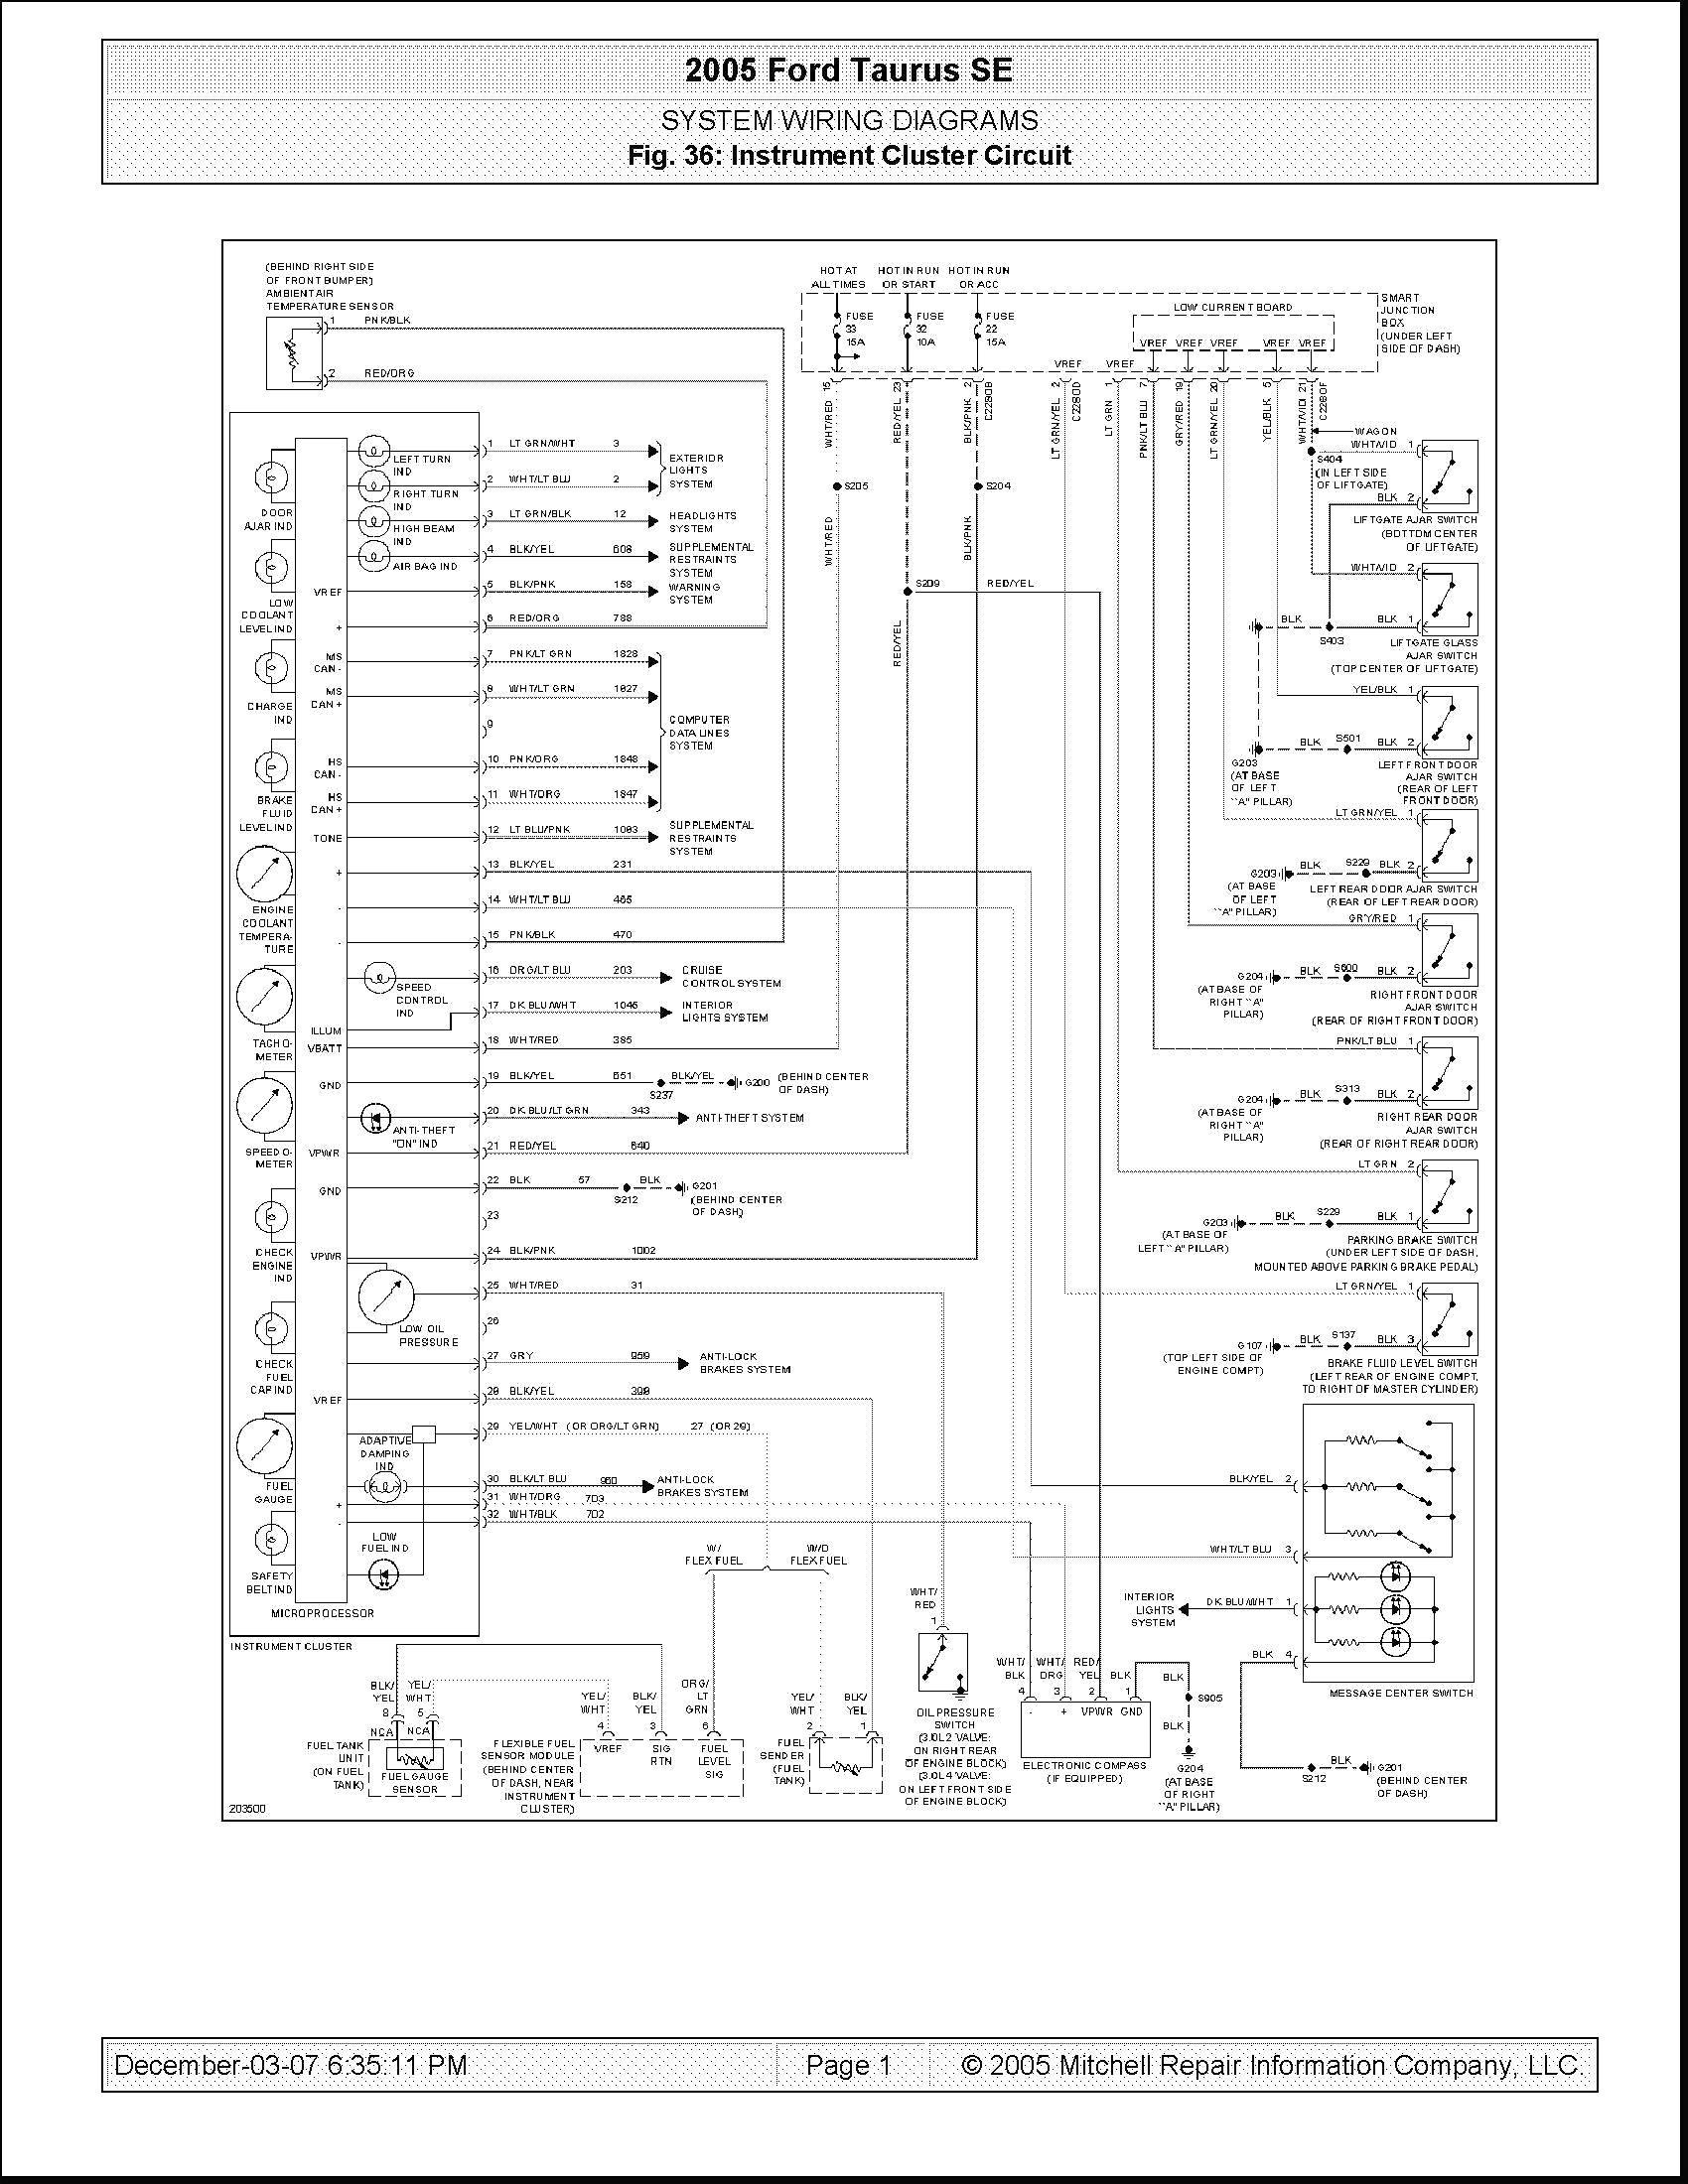 2003 Ford Expedition Stereo Wiring Diagram Simple 2001 Ford Mustang Radio Wiring Diagram Chunyan